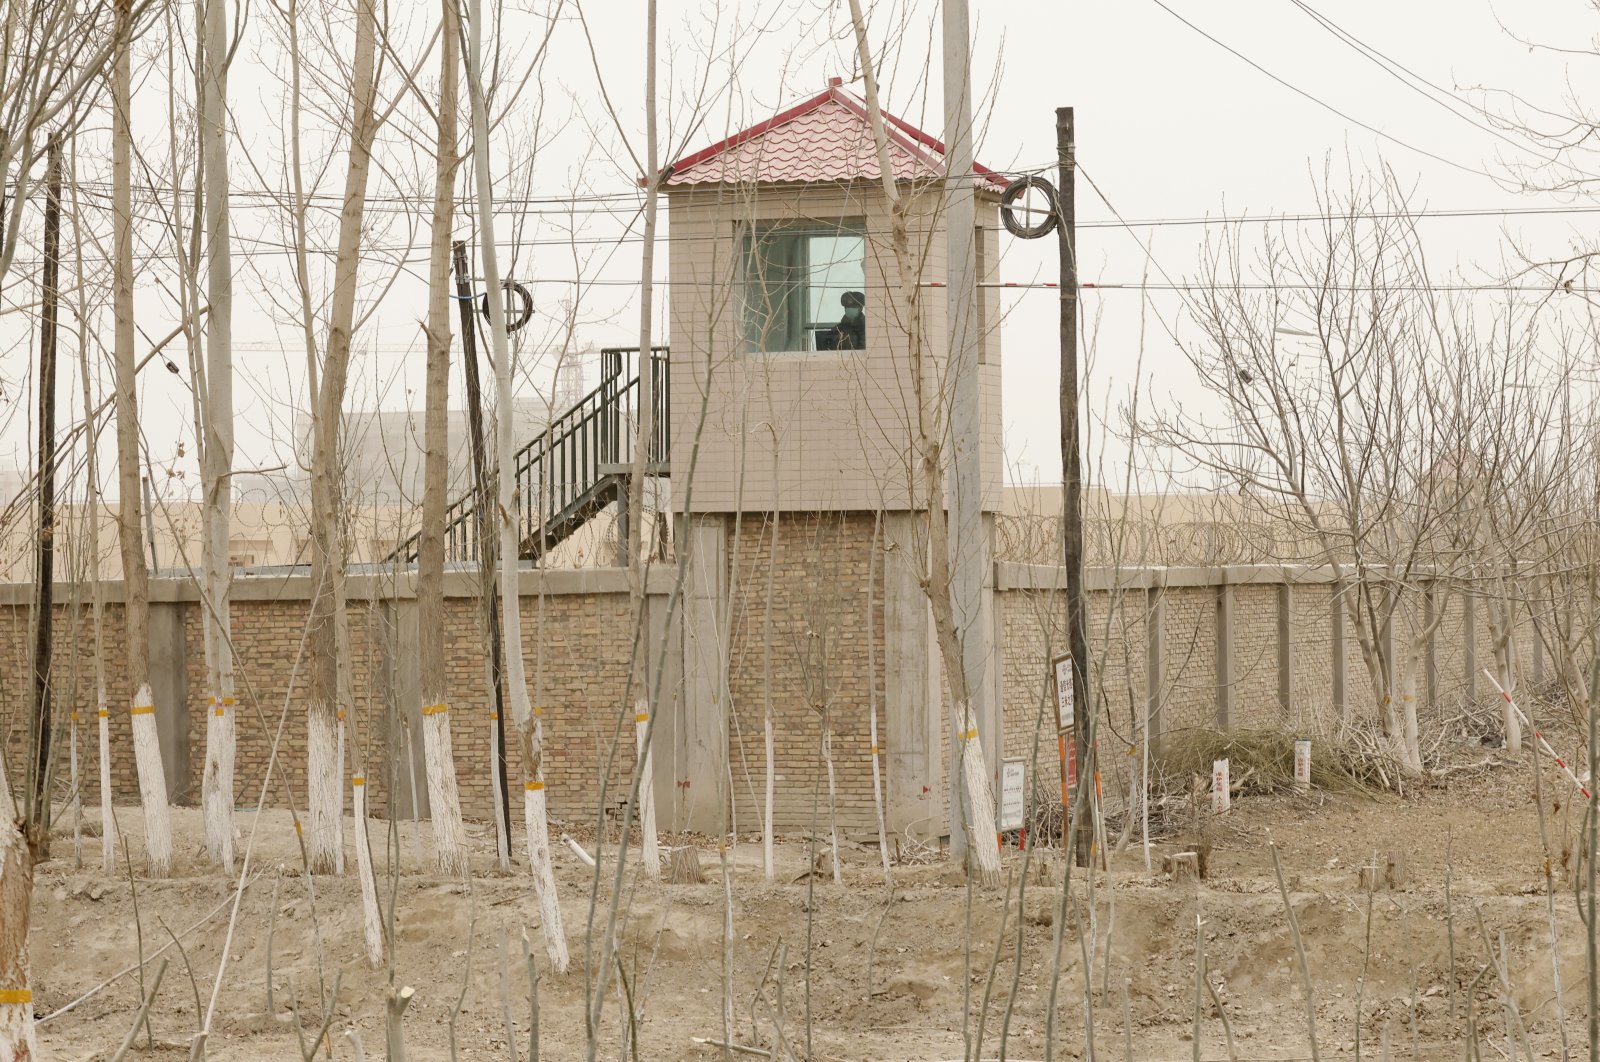 A security person watches from a guard tower around a detention facility in Yarkent county in northwestern China's Xinjiang Uyghur Autonomous Region, March 21, 2021. (AP Photo)